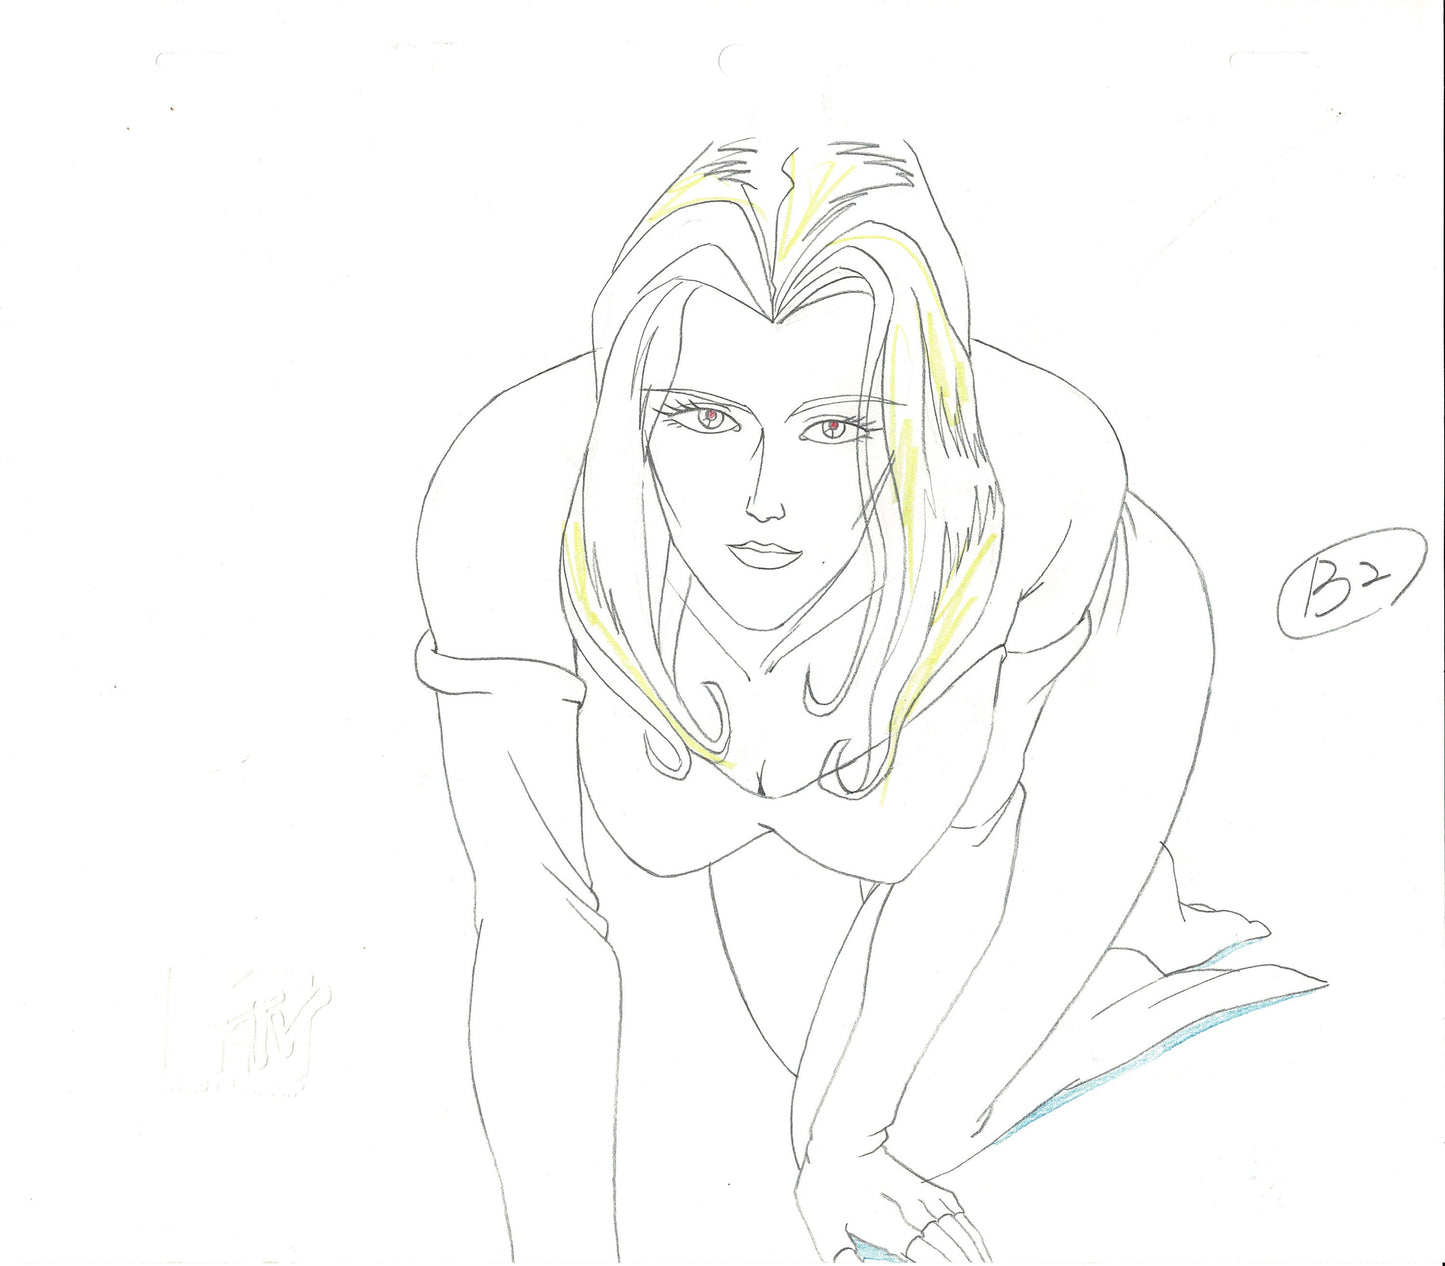 Aeon Flux Original Production Animation Cel Drawing from MTV 1991-1995 with MTV COA and Seal b2